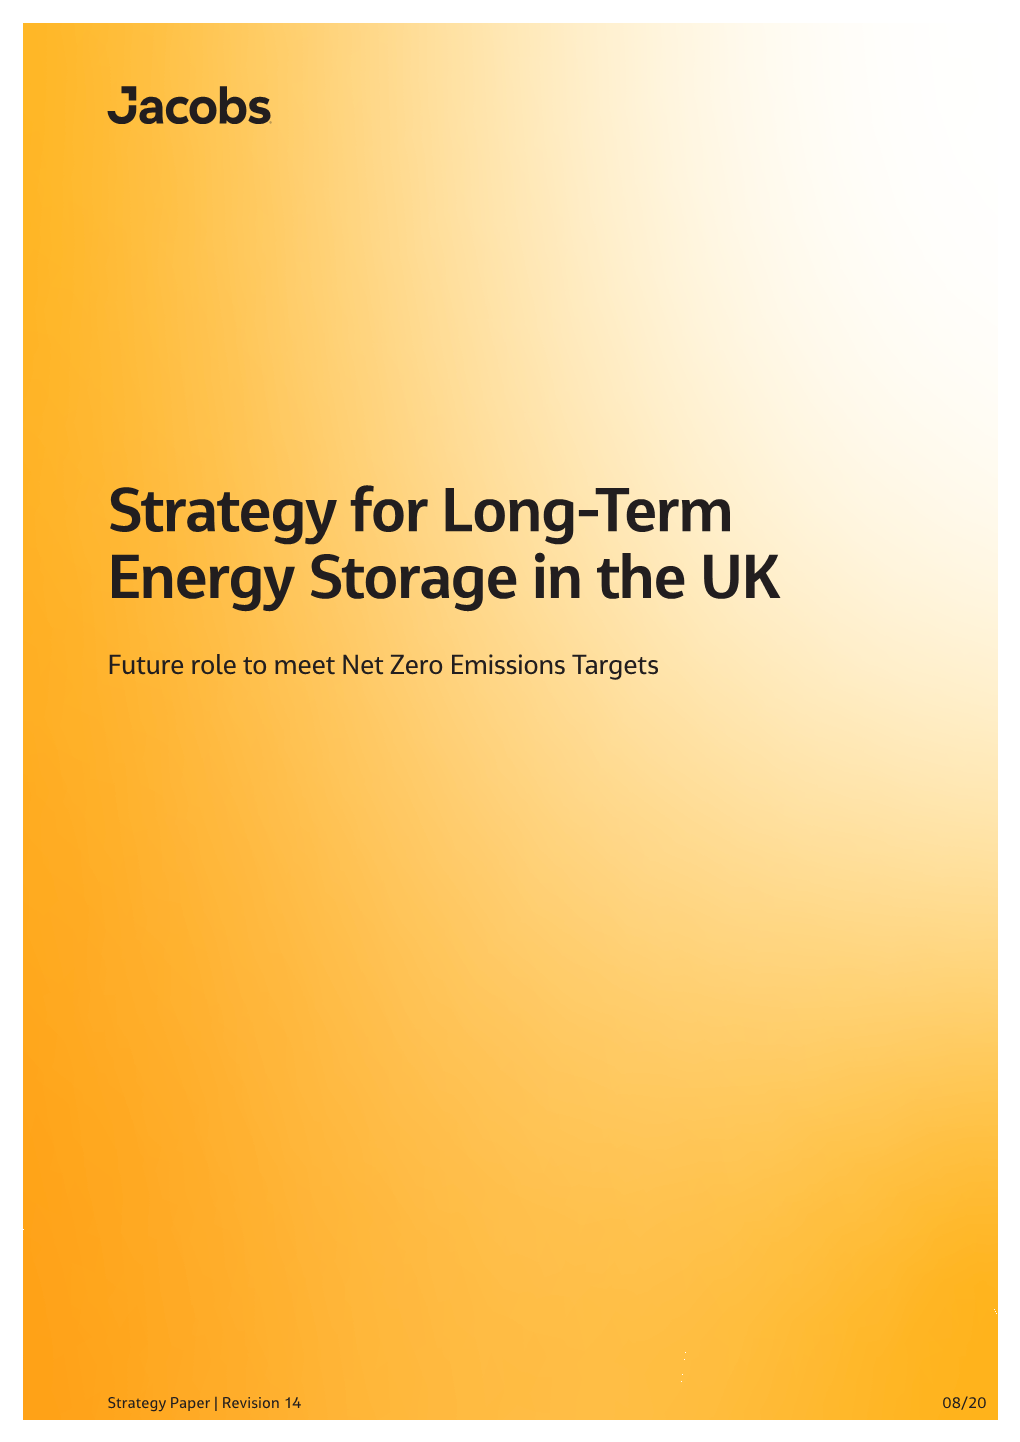 Strategy for Long-Term Energy Storage in the UK